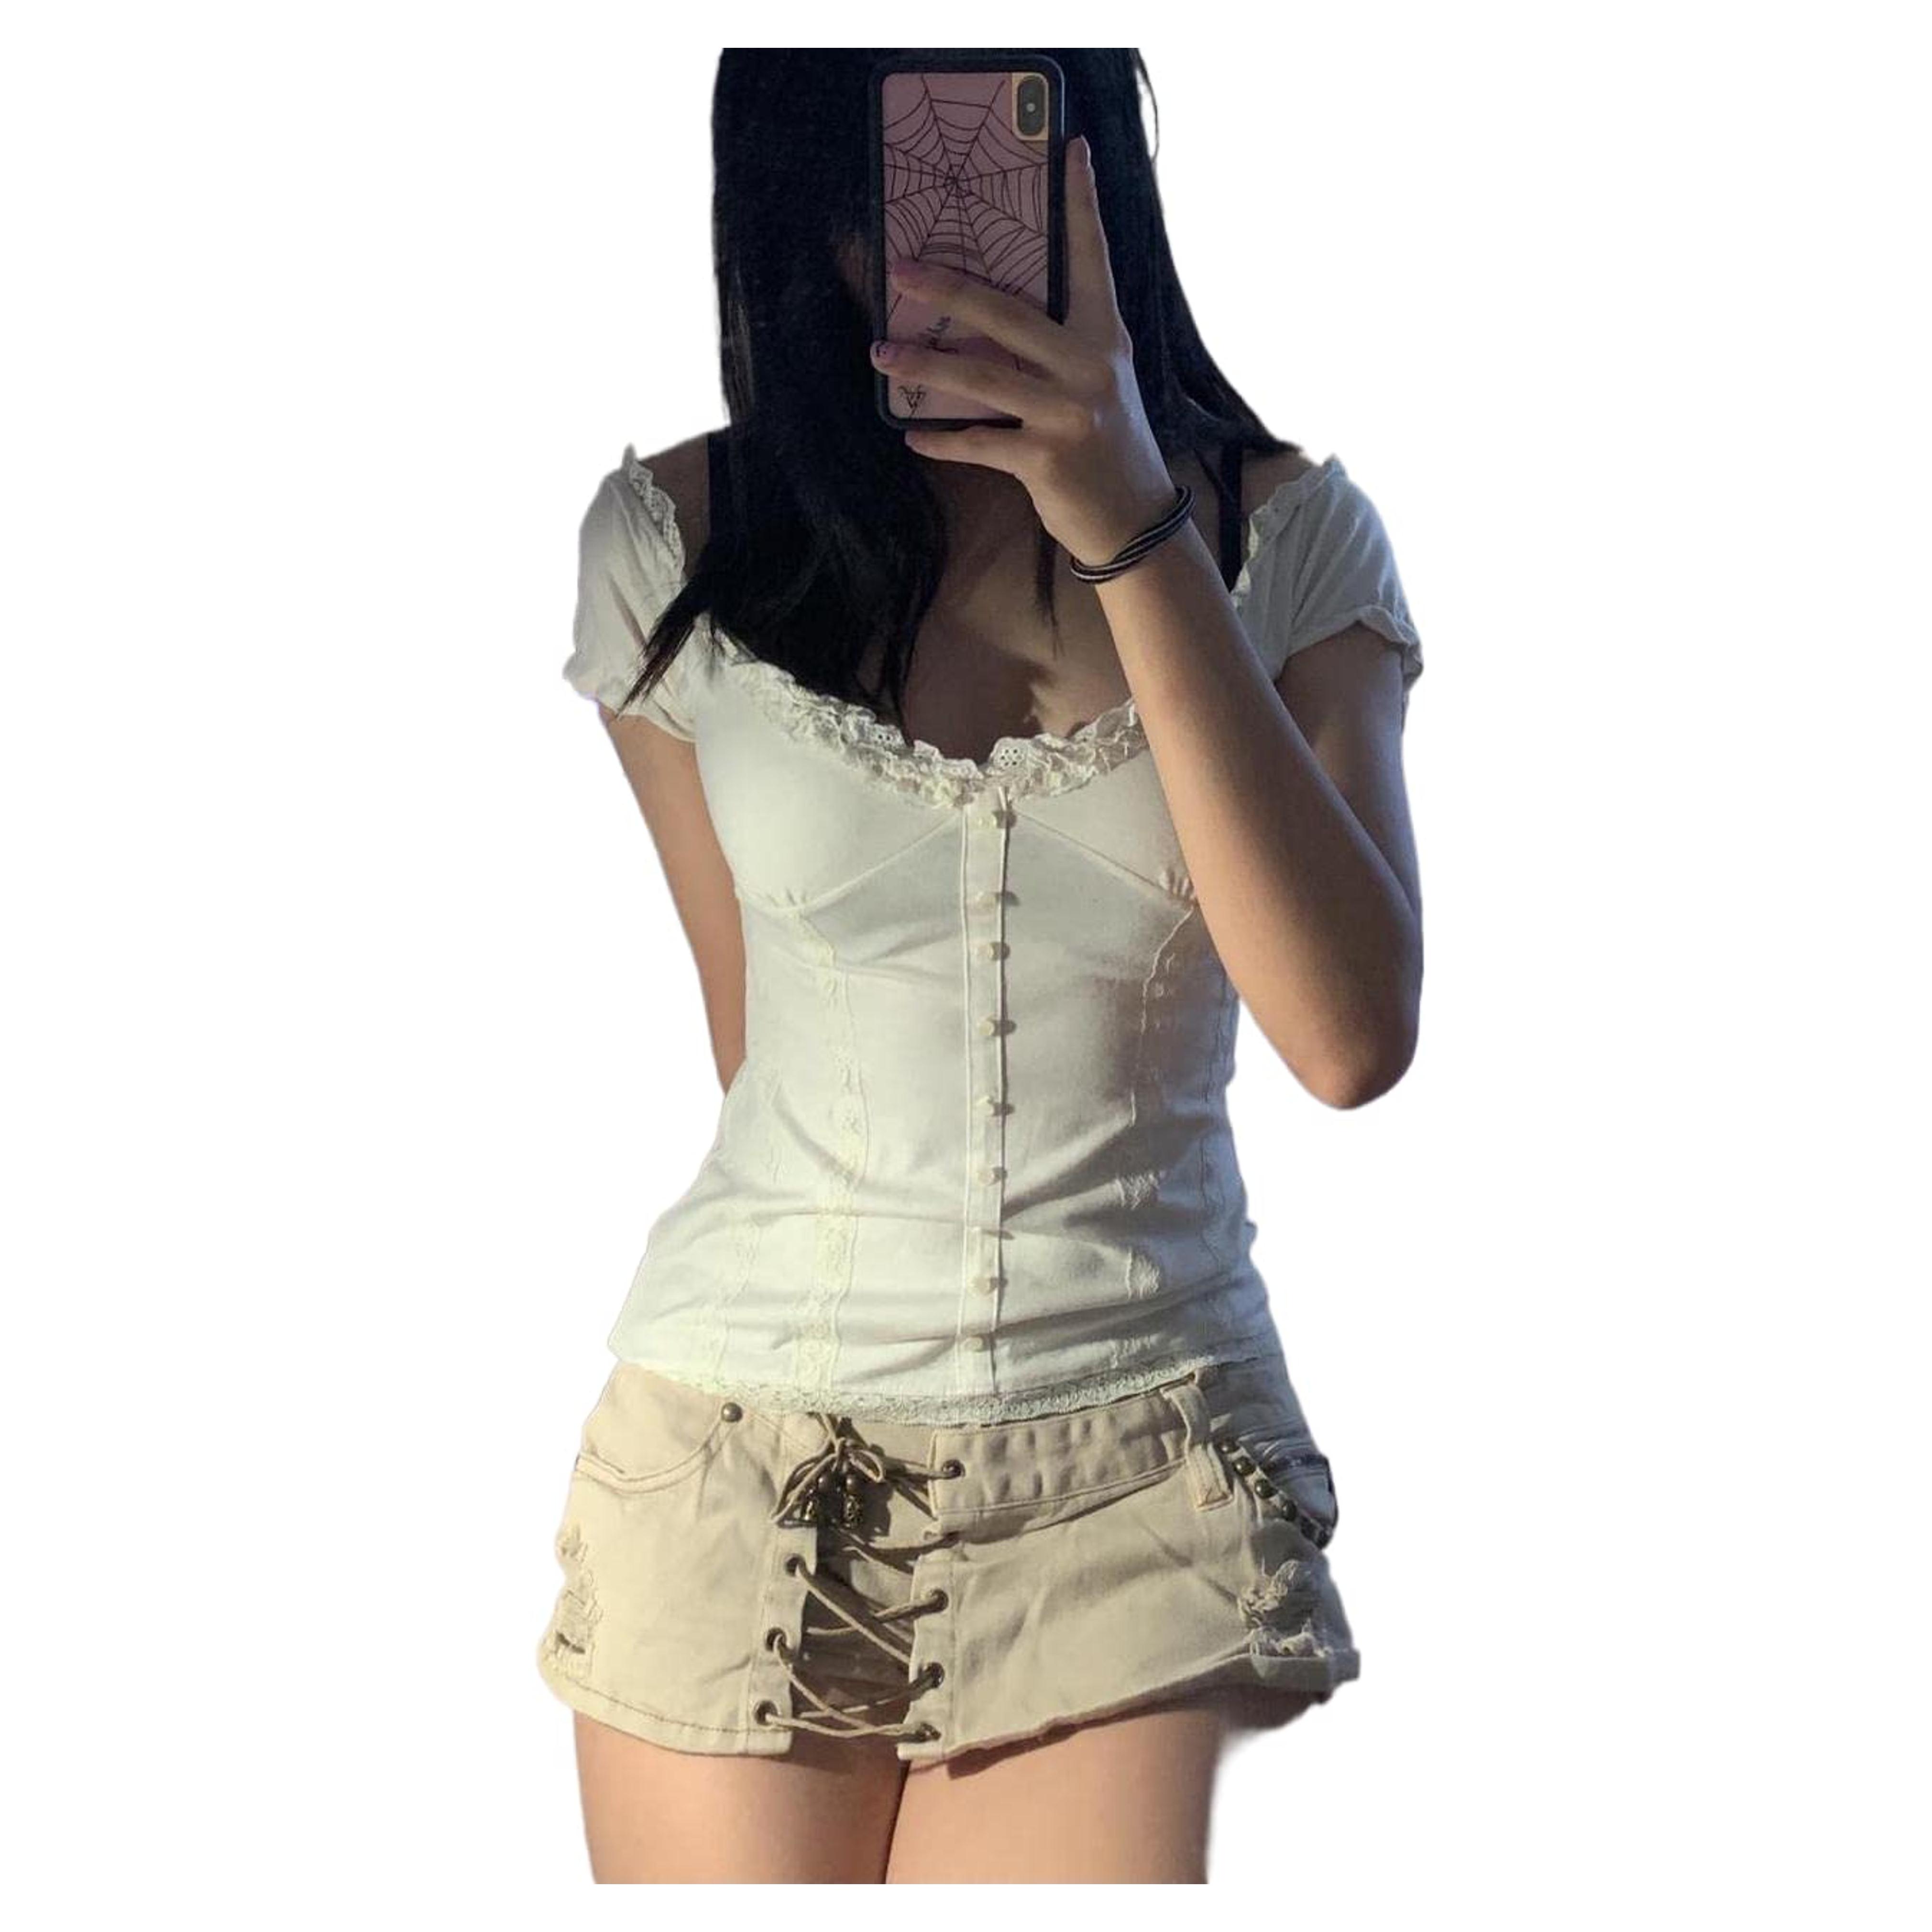 Fairy Grunge Aesthetic Shirts Tops for Women Teens Girls Short Sleeve Vintage Graphic Print Lace Summer Tees Medium White Lace